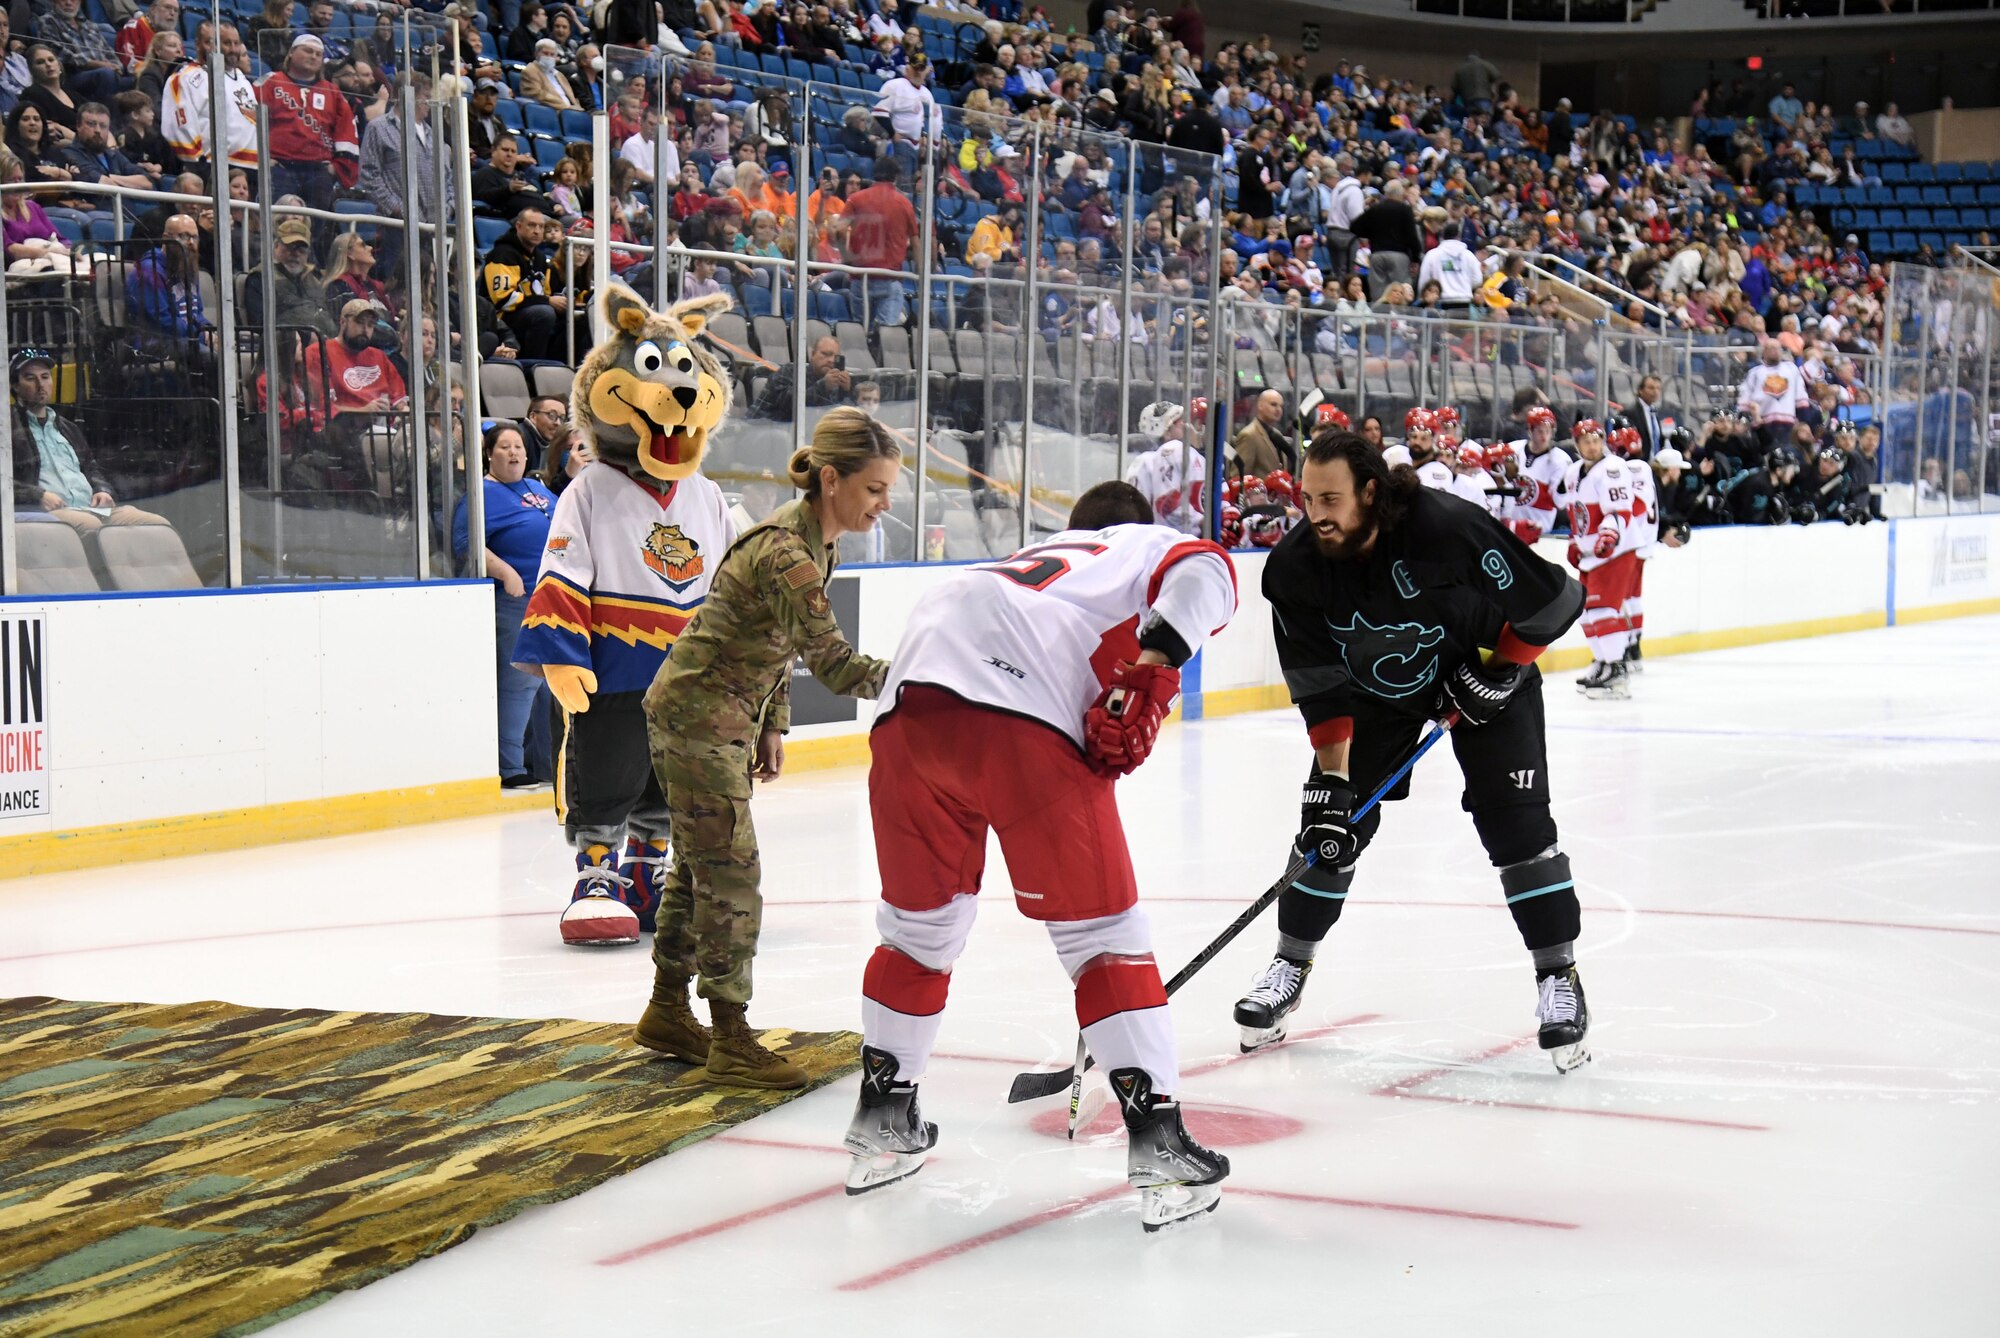 U.S. Air Force Maj. Gen. Michele Edmondson, Second Air Force commander, participates in a ceremonial puck drop during the Biloxi Pro Hockey game inside the Mississippi Coast Coliseum at Biloxi, Mississippi, Dec. 2, 2021. The Keesler Air Force Base Honor Guard and 81st Training Wing leadership also participated in pre-game festivities. (U.S. Air Force photo by Kemberly Groue)